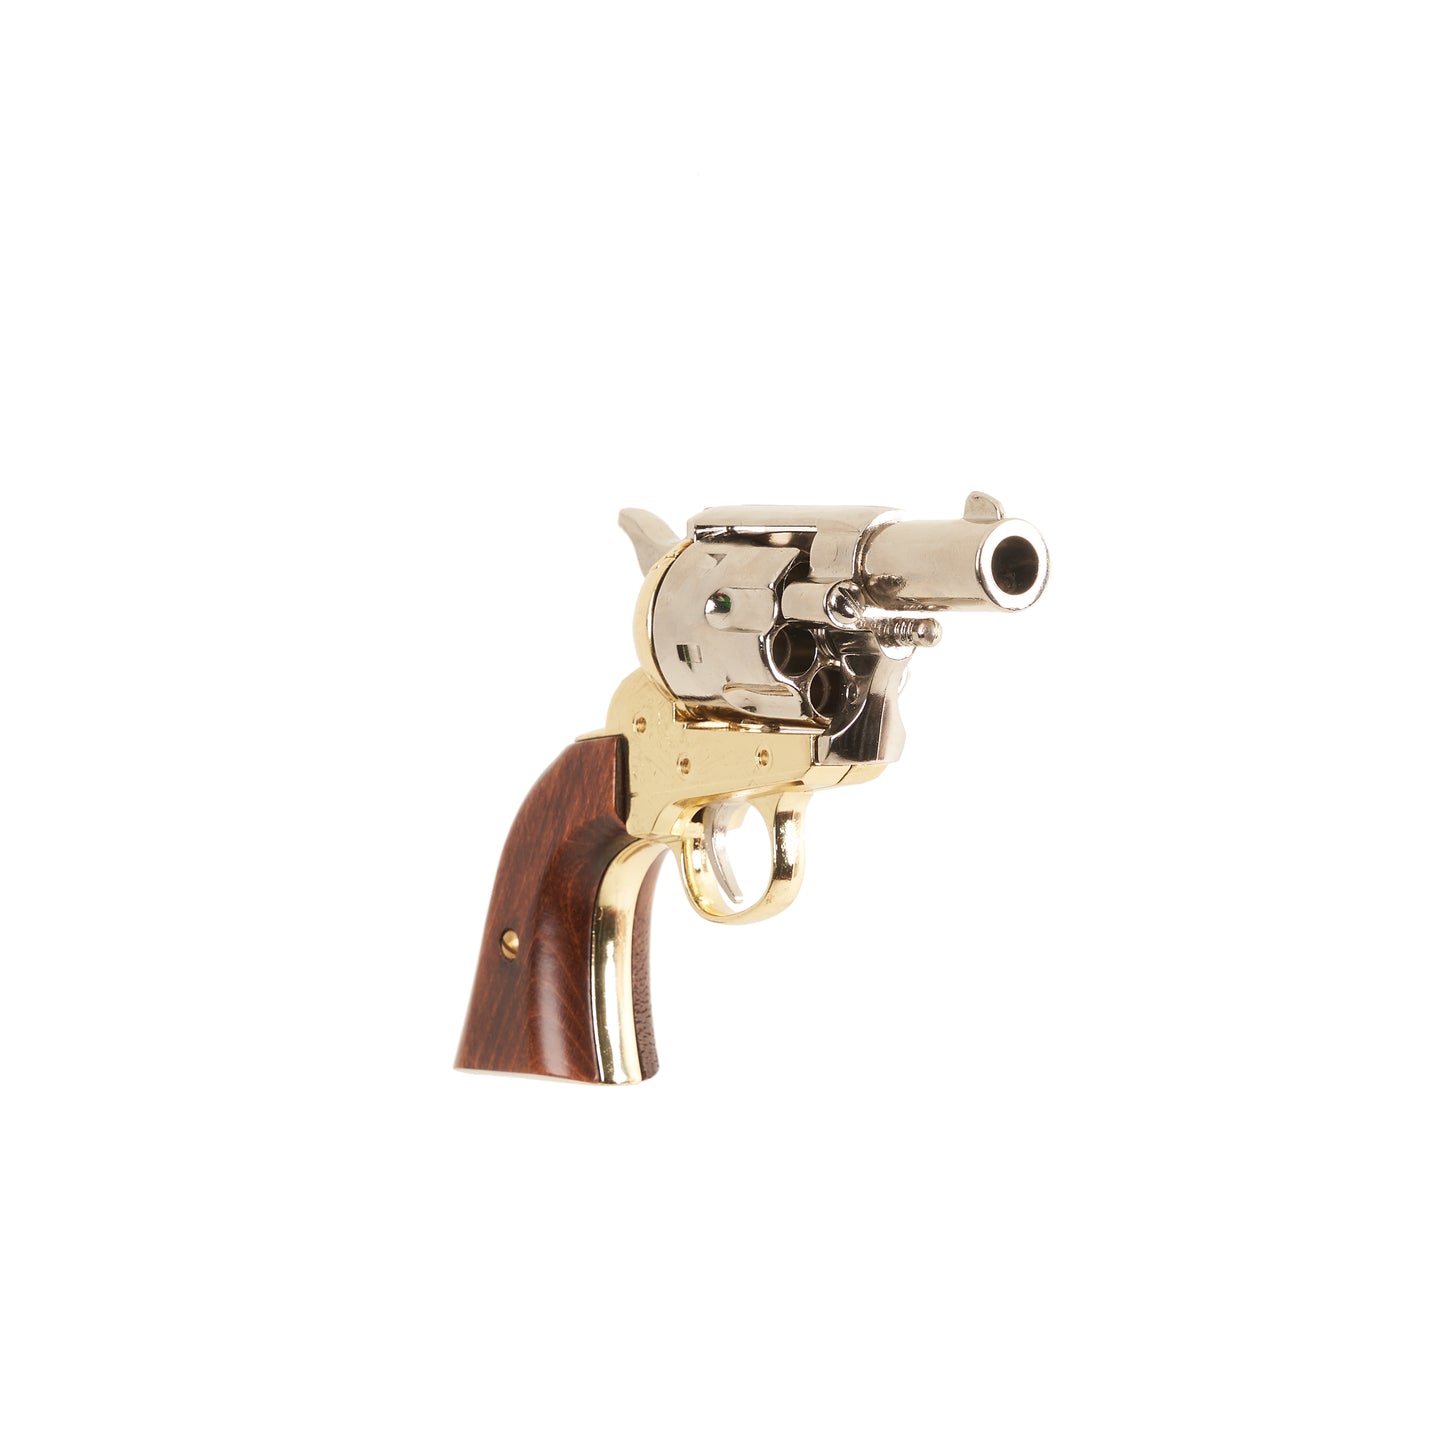 Front view of polished nickel Non-Firing 1873 .45 Caliber Short Revolver with brass trigger guard and accents and wood grip.